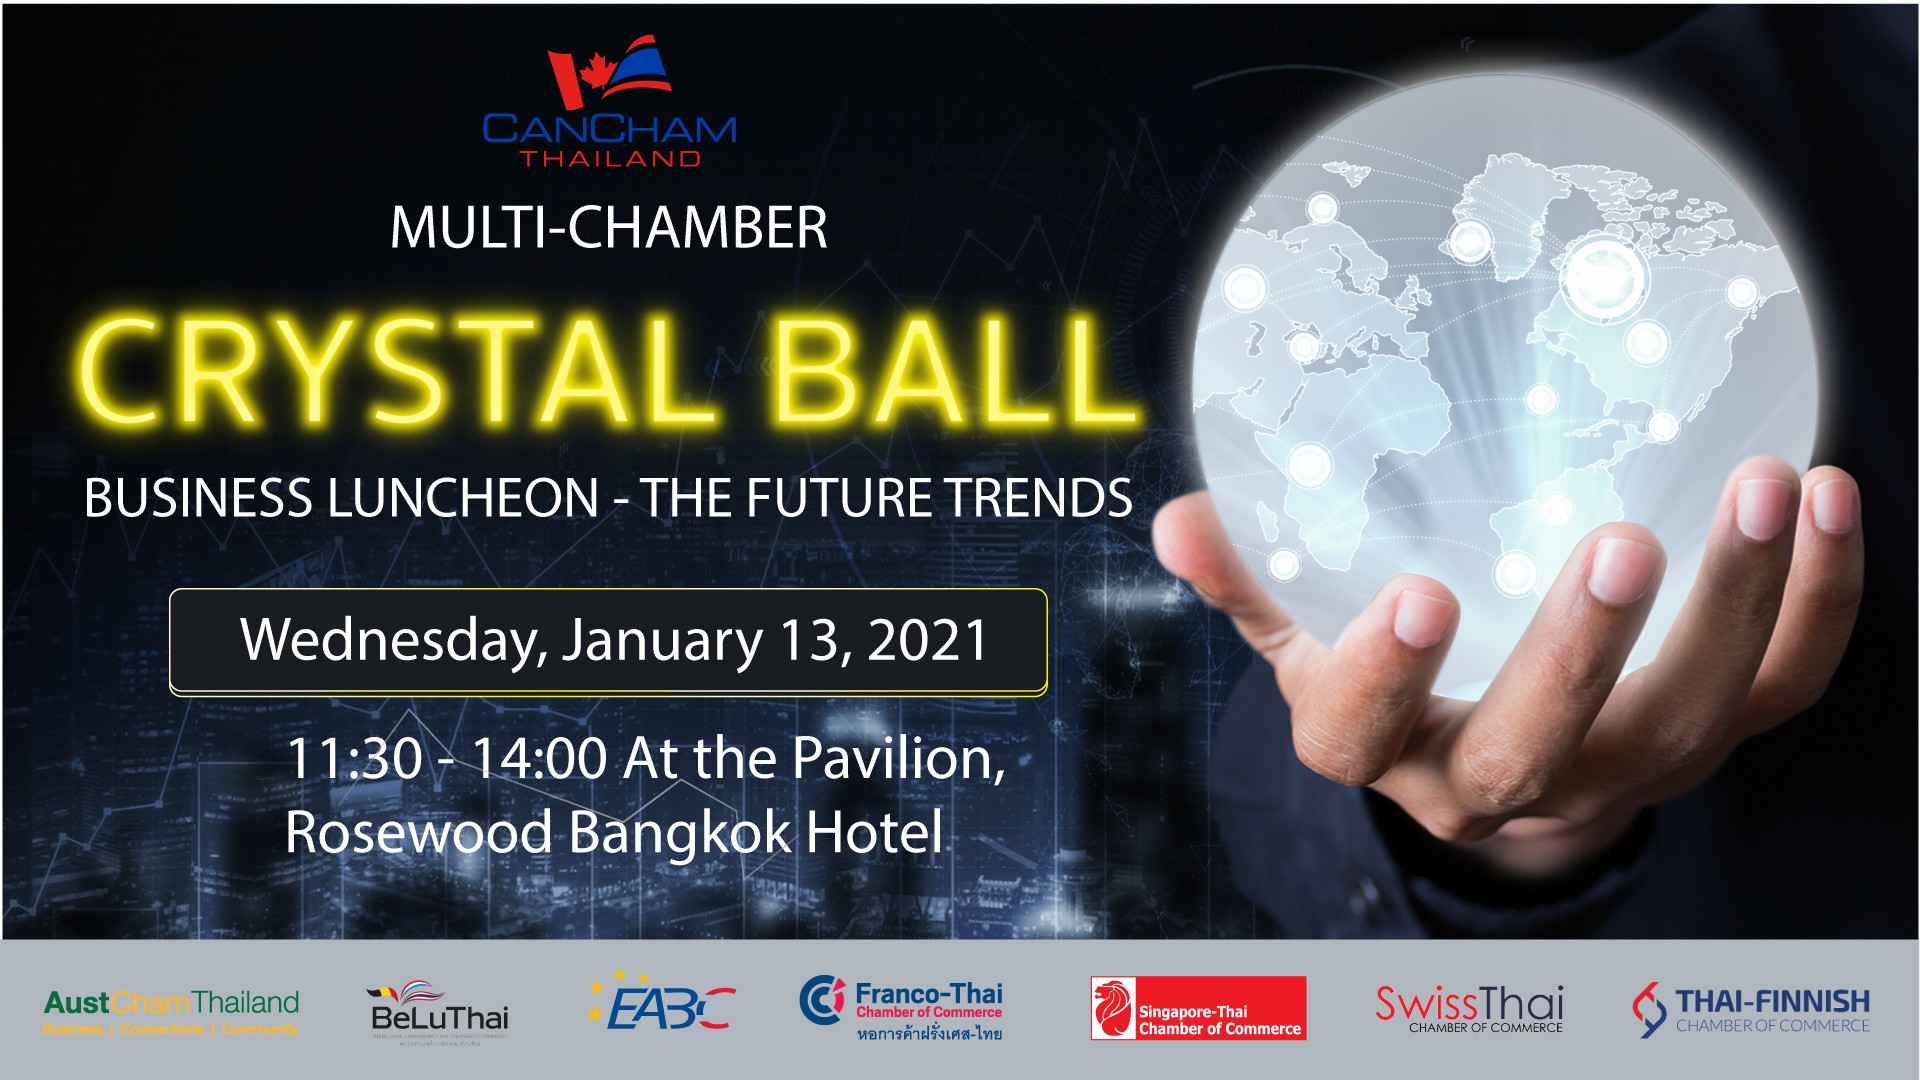 RESCHEDULED! Crystal Ball Business Luncheon - The Future Trends